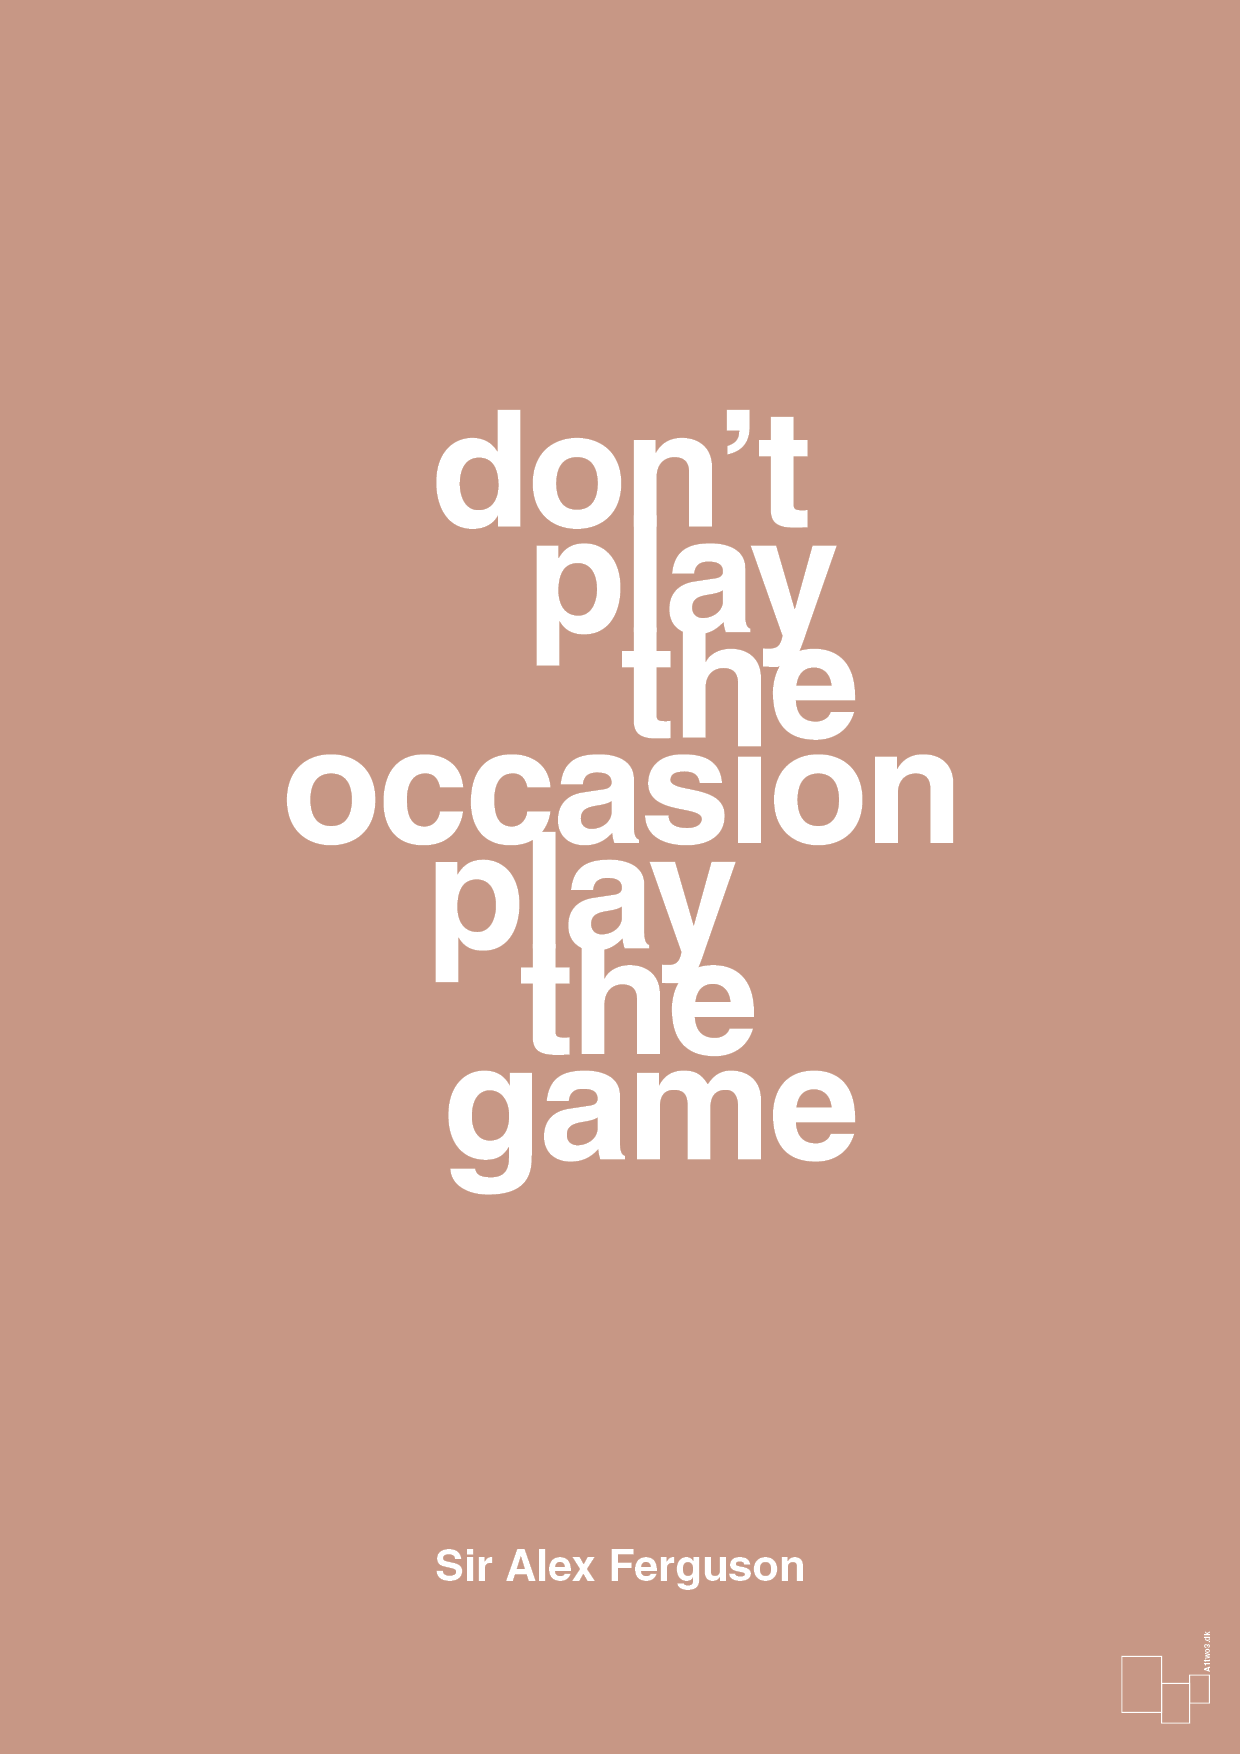 don’t play the occasion play the game - Plakat med Citater i Powder